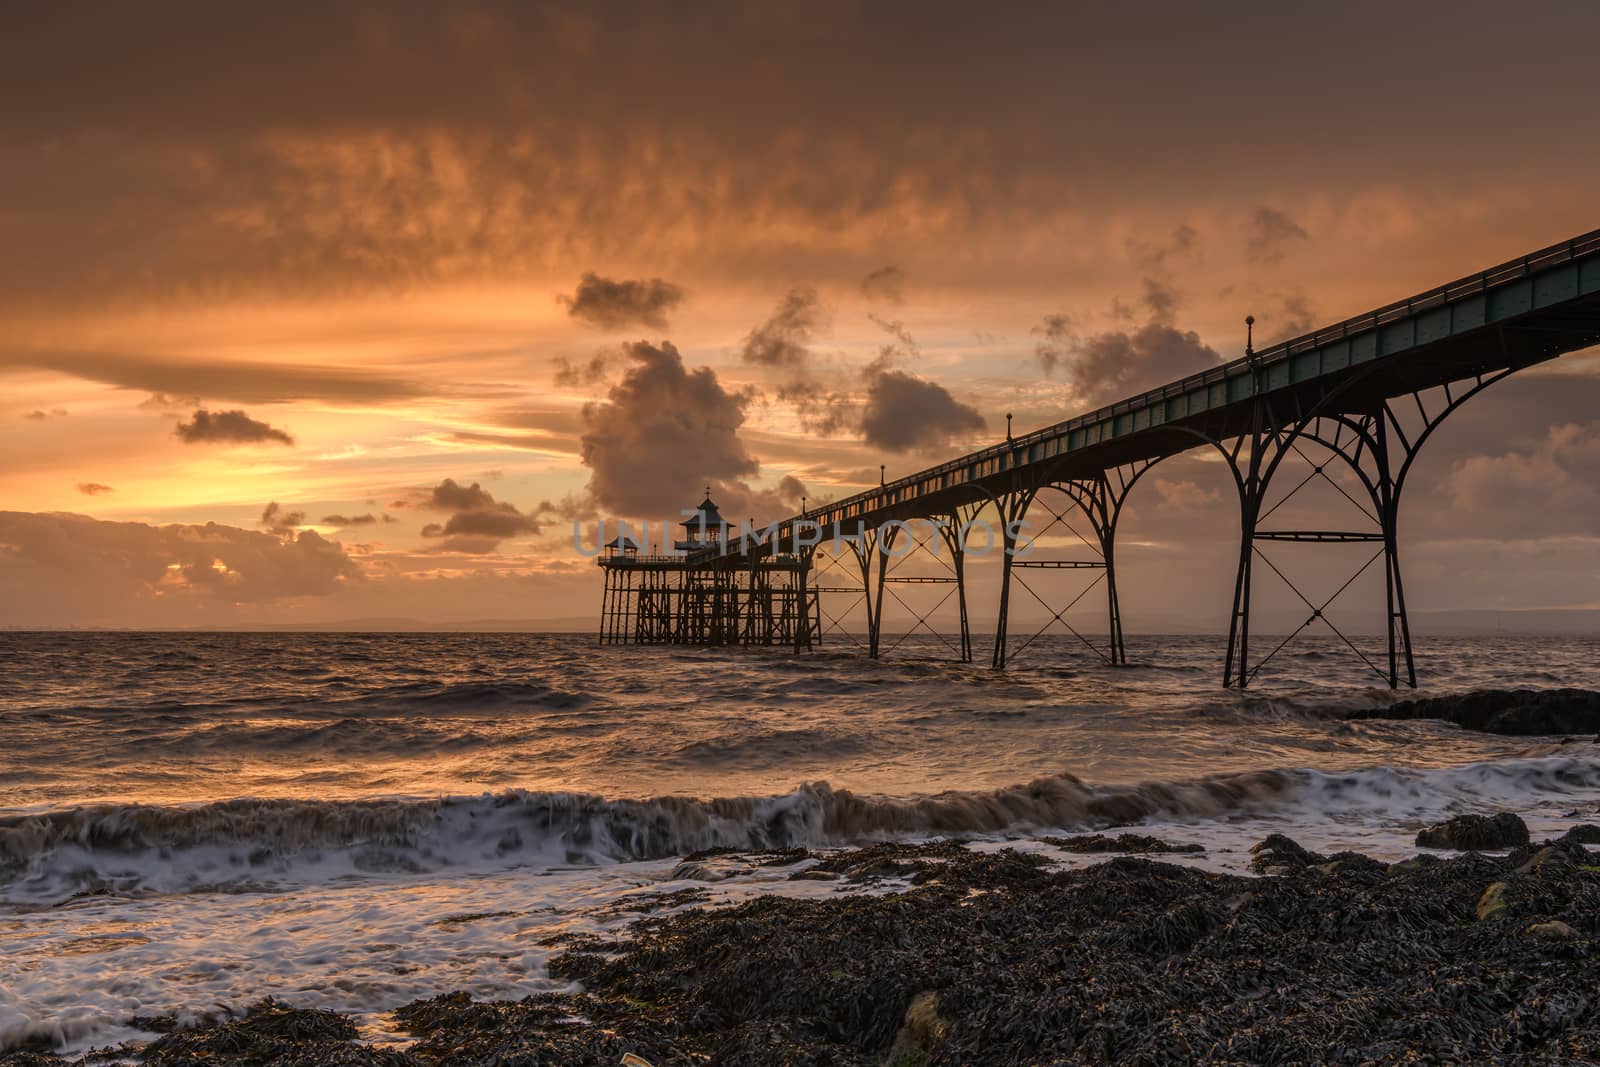 Coastal Sunset at Clevedon pier in England